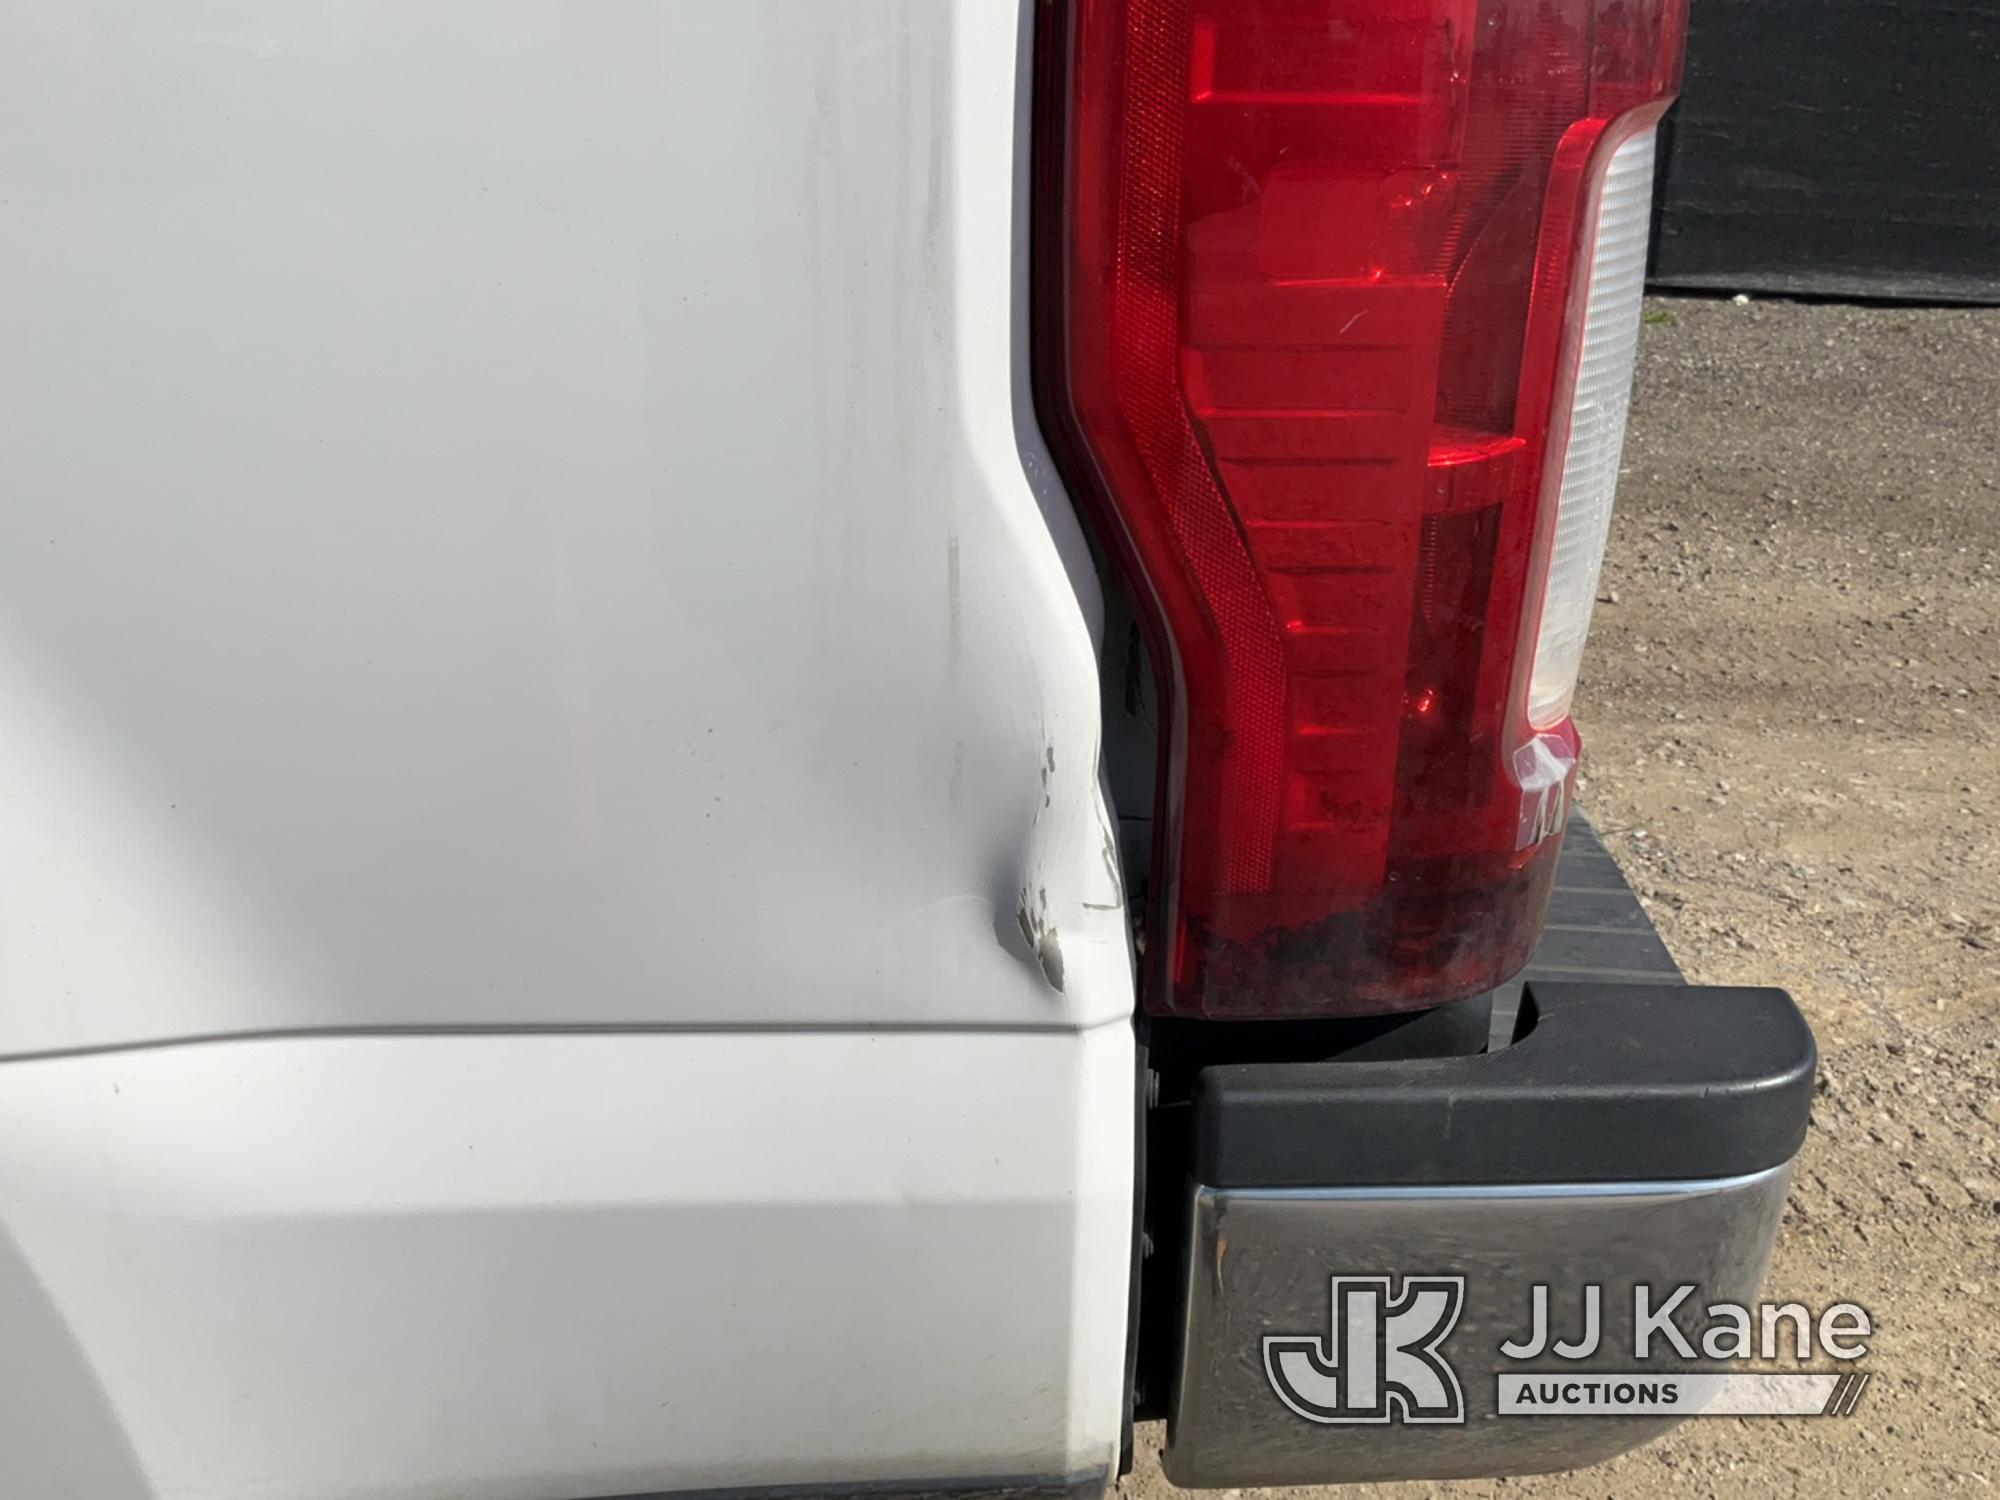 (Charlotte, MI) 2019 Ford F250 4x4 Extended-Cab Pickup Truck Runs, Moves, Check Engine Light